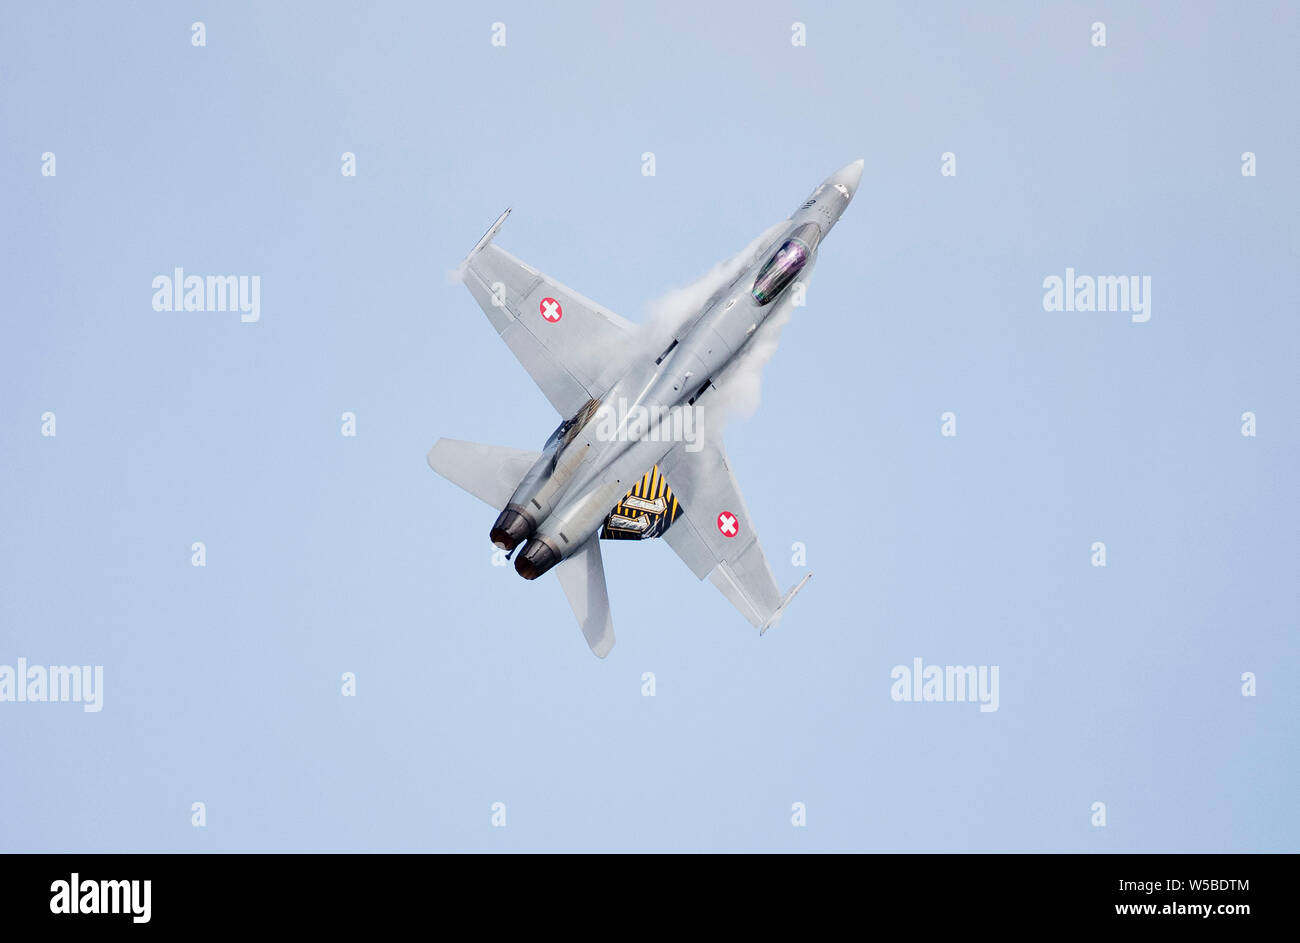 Swiss AIr Force F-18C Hornet displays at the 2019 RIAT air show, Fairford, Gloucestershire,uk Stock Photo